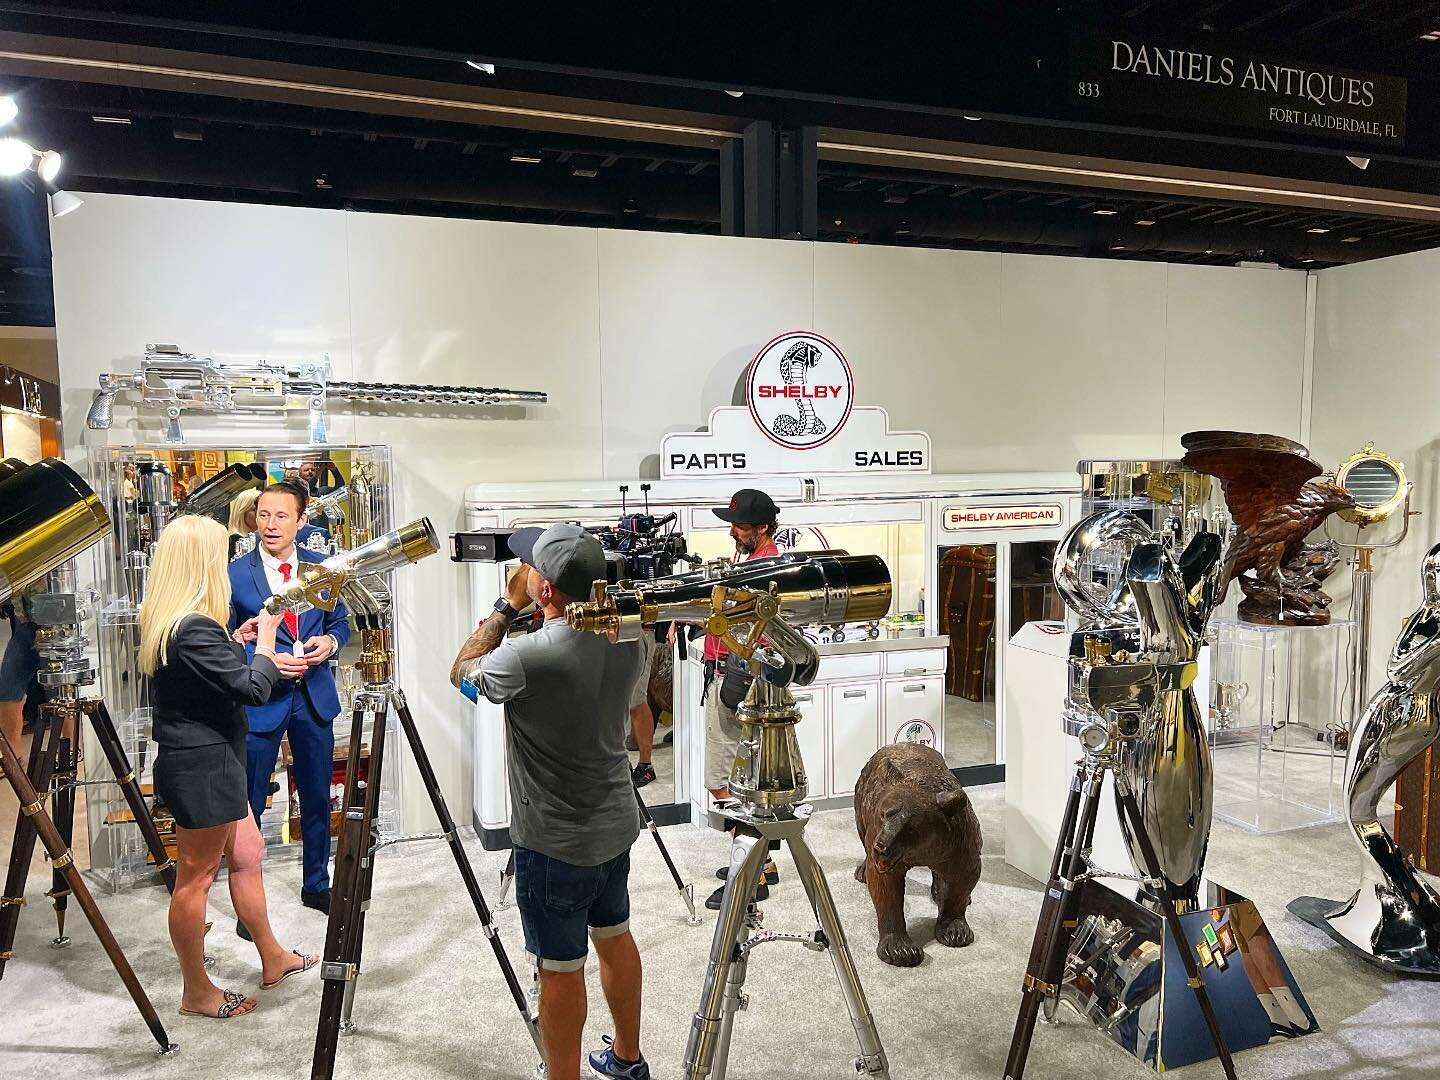 Today at the Palm Beach Antiques show; National TV shooting at our booth!
DM us your email address if you would like complimentary tickets to the show. See you there!
&bull;
#danielsantiques #palmbeachantiqueshow #antiques #vintage #shelby #louisvuit